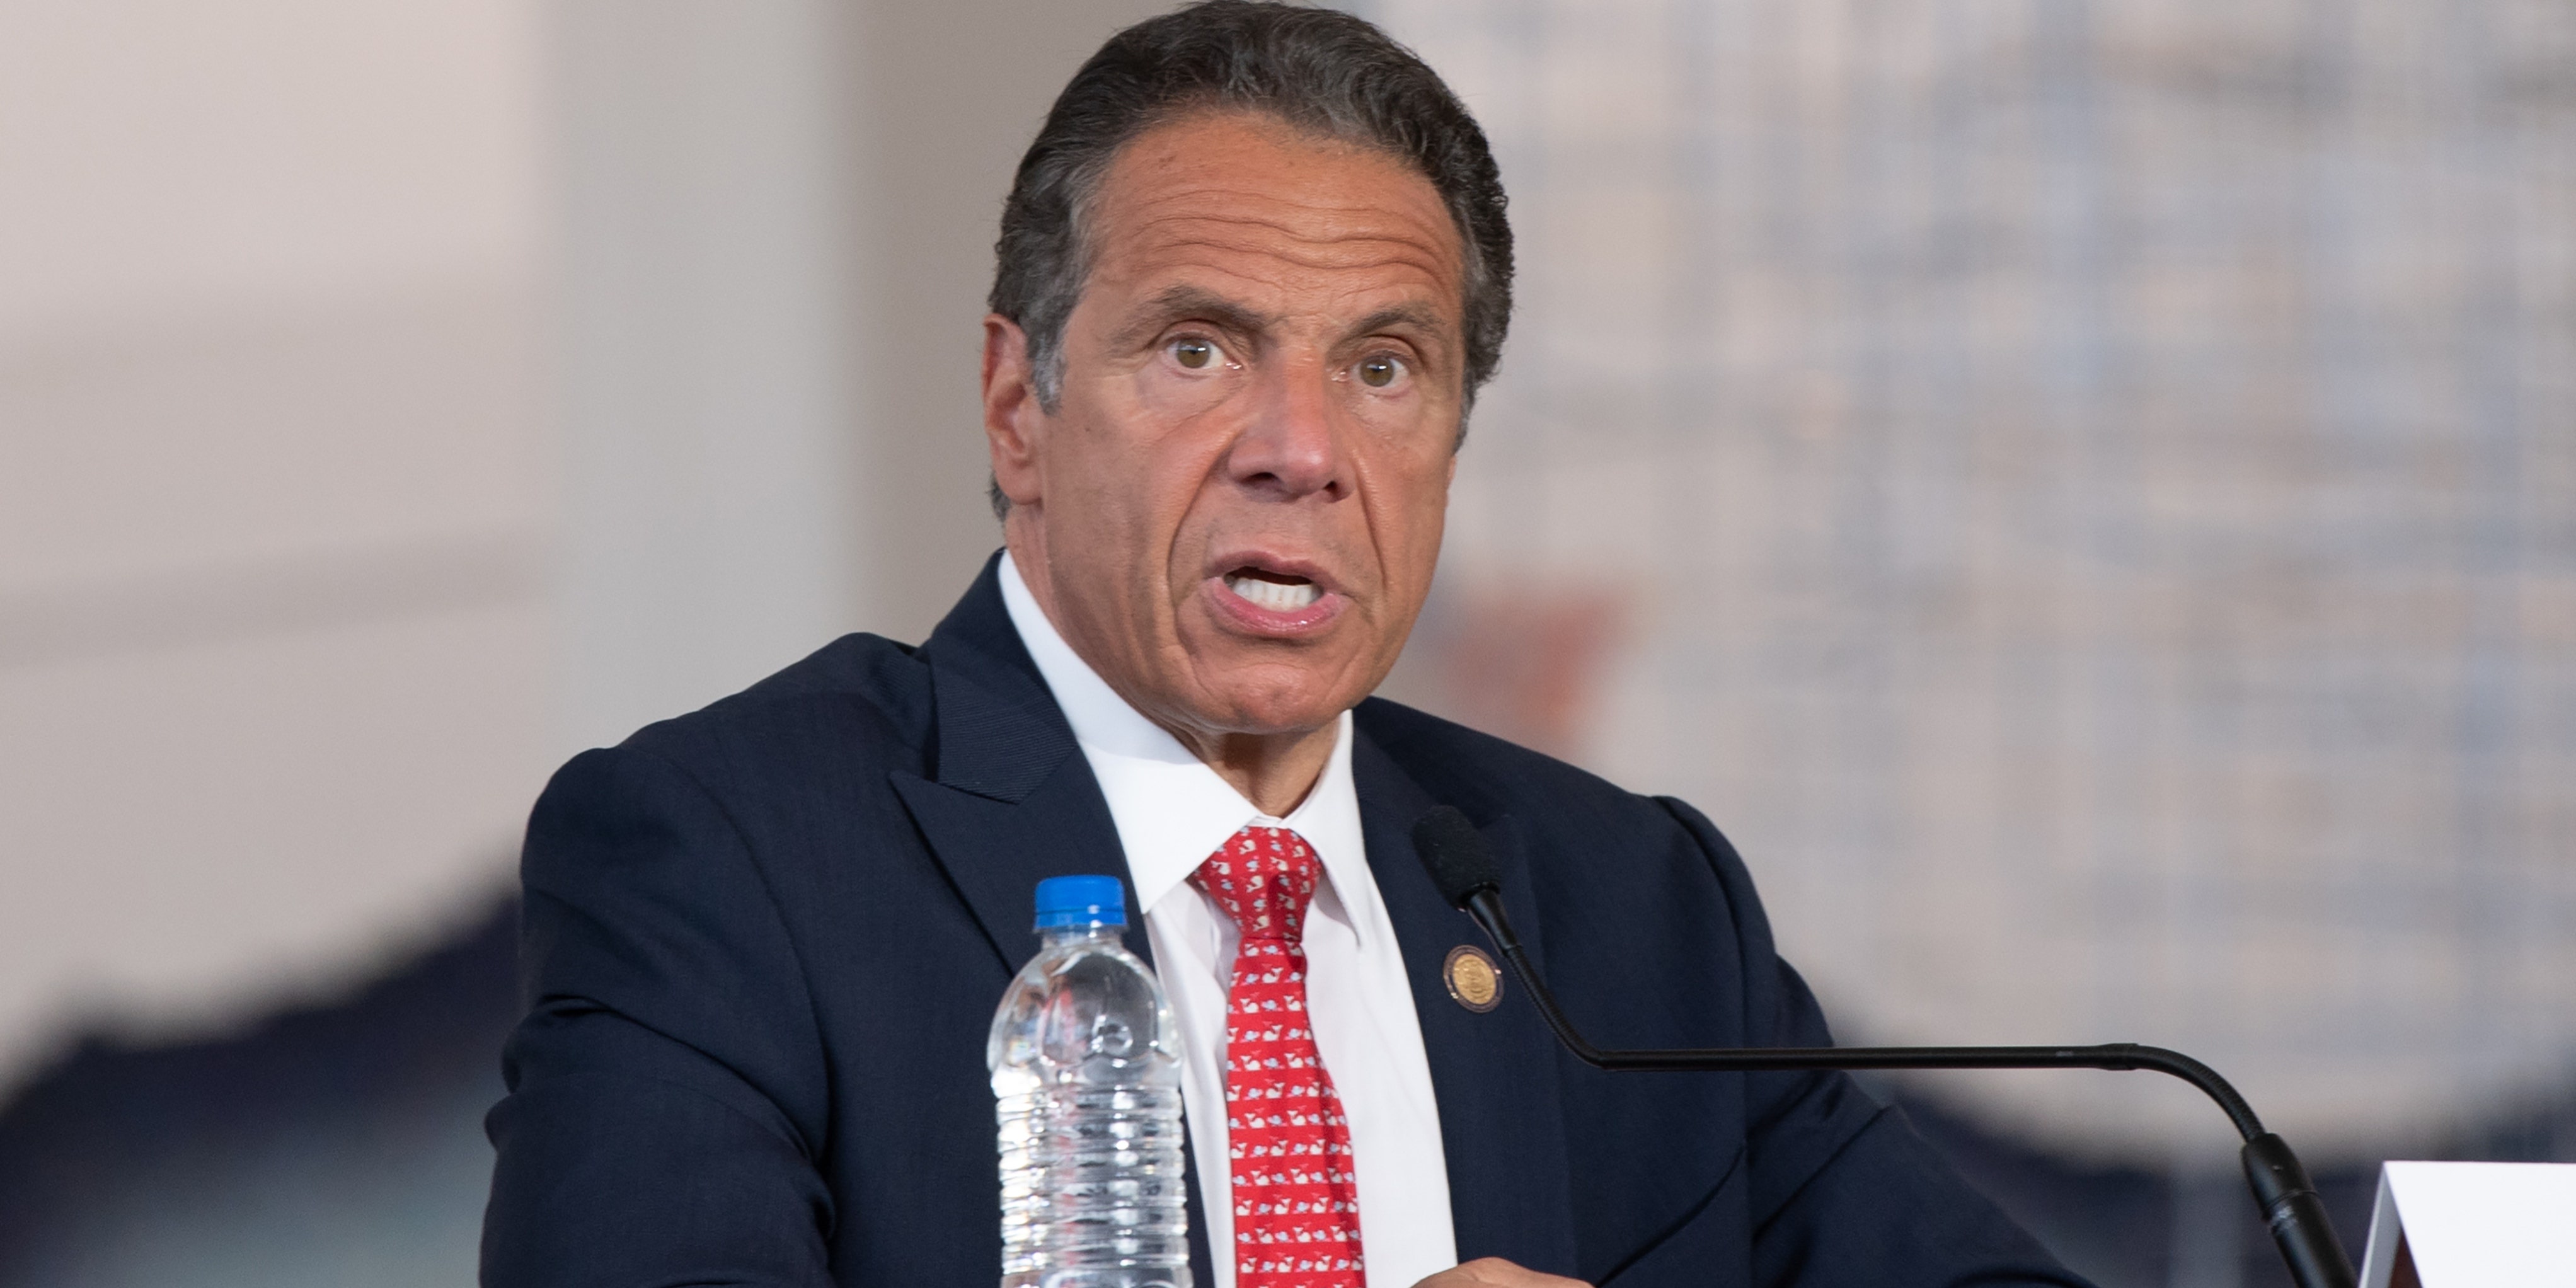 Andrew Cuomo Sexual Harassment Allegations